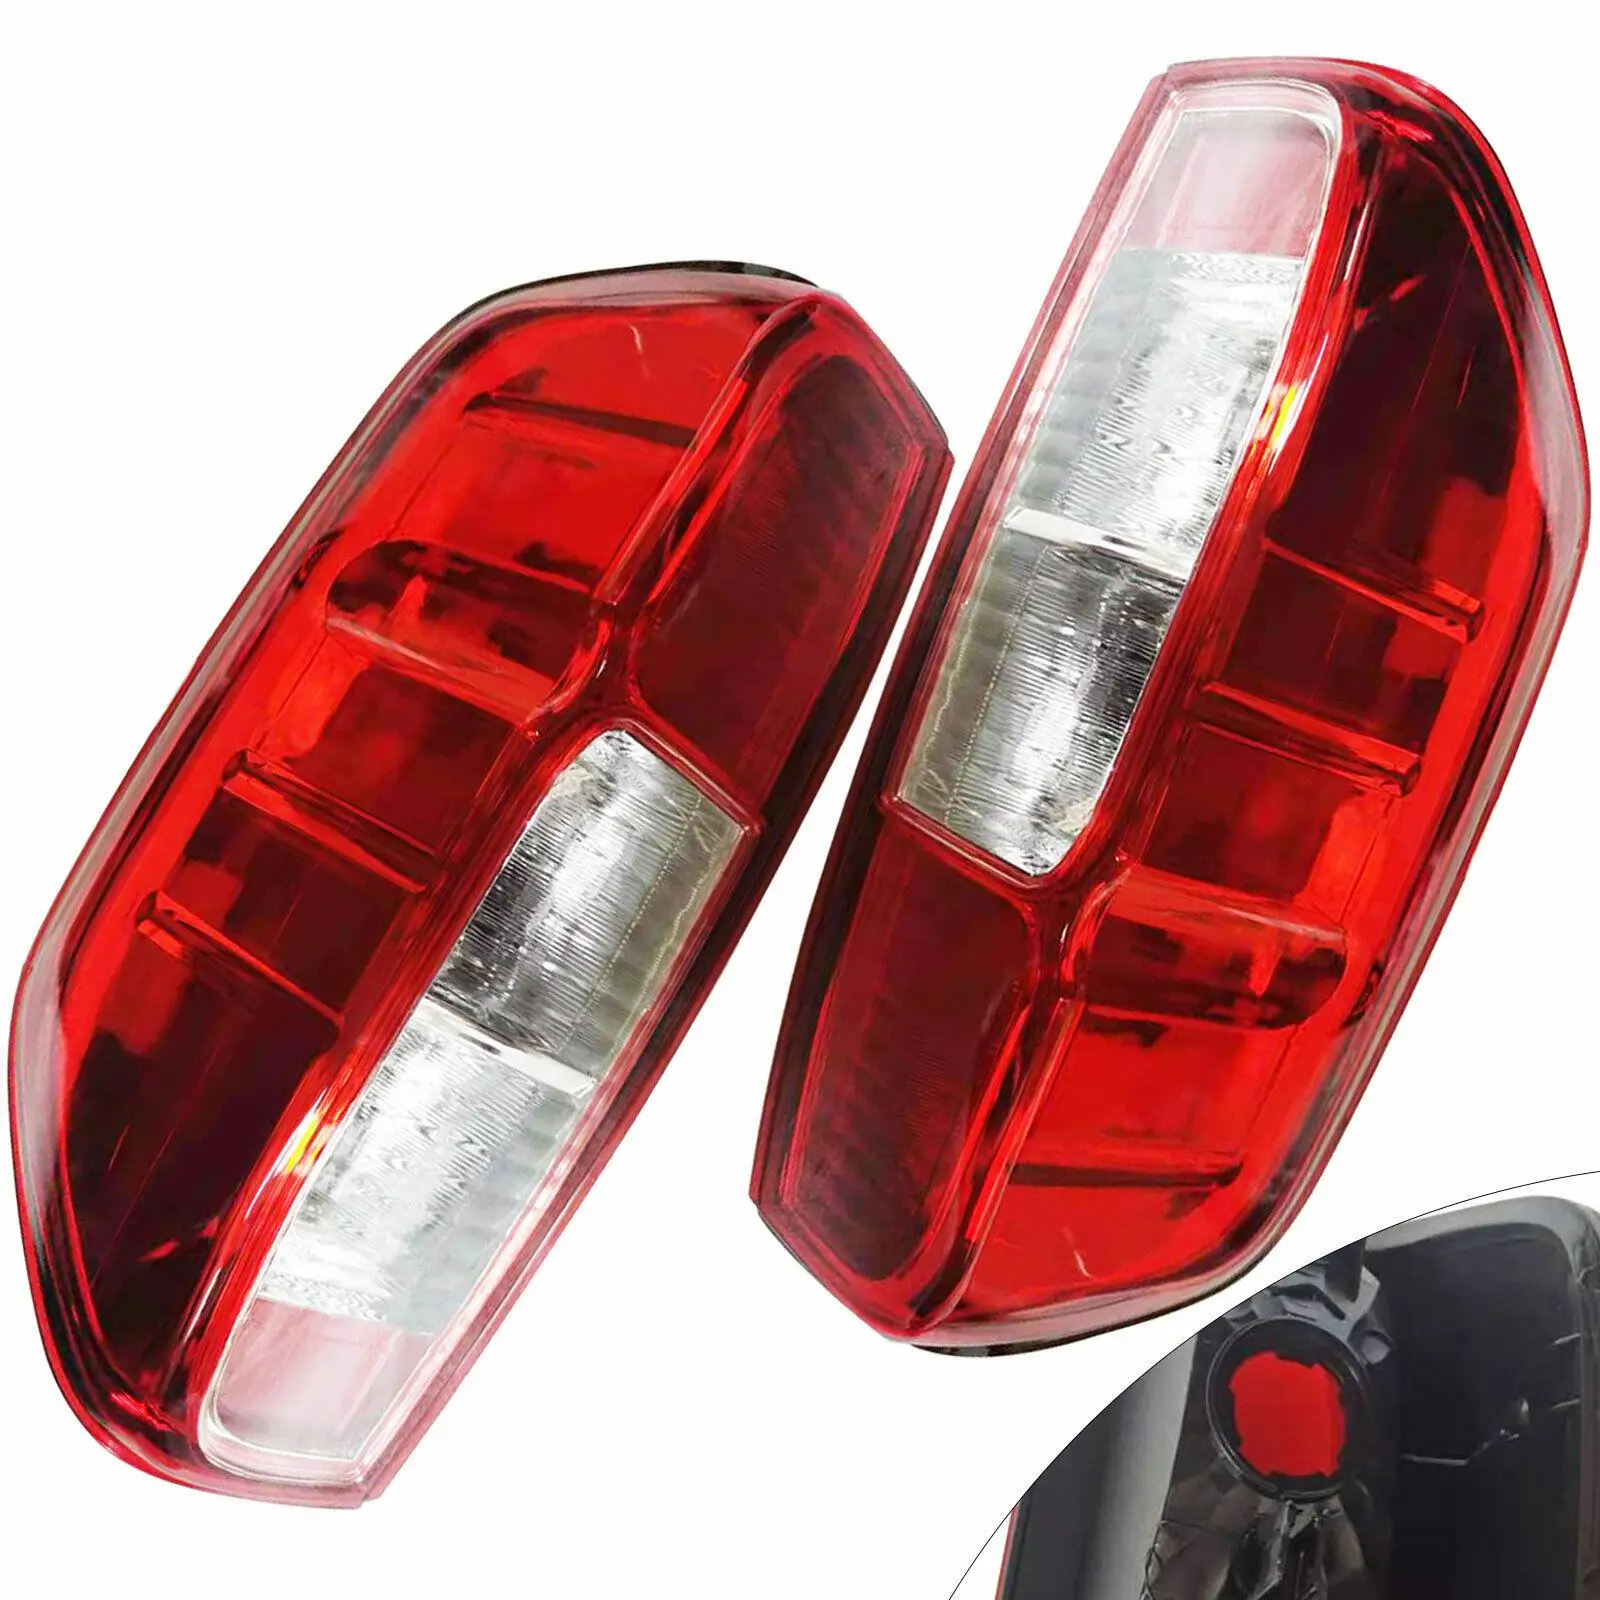 Pair Left & Right Rear Brake Lamps Tail Lights Taillamps for Nissan Frontier 2005-2015 Red Lens фонари tail lights left